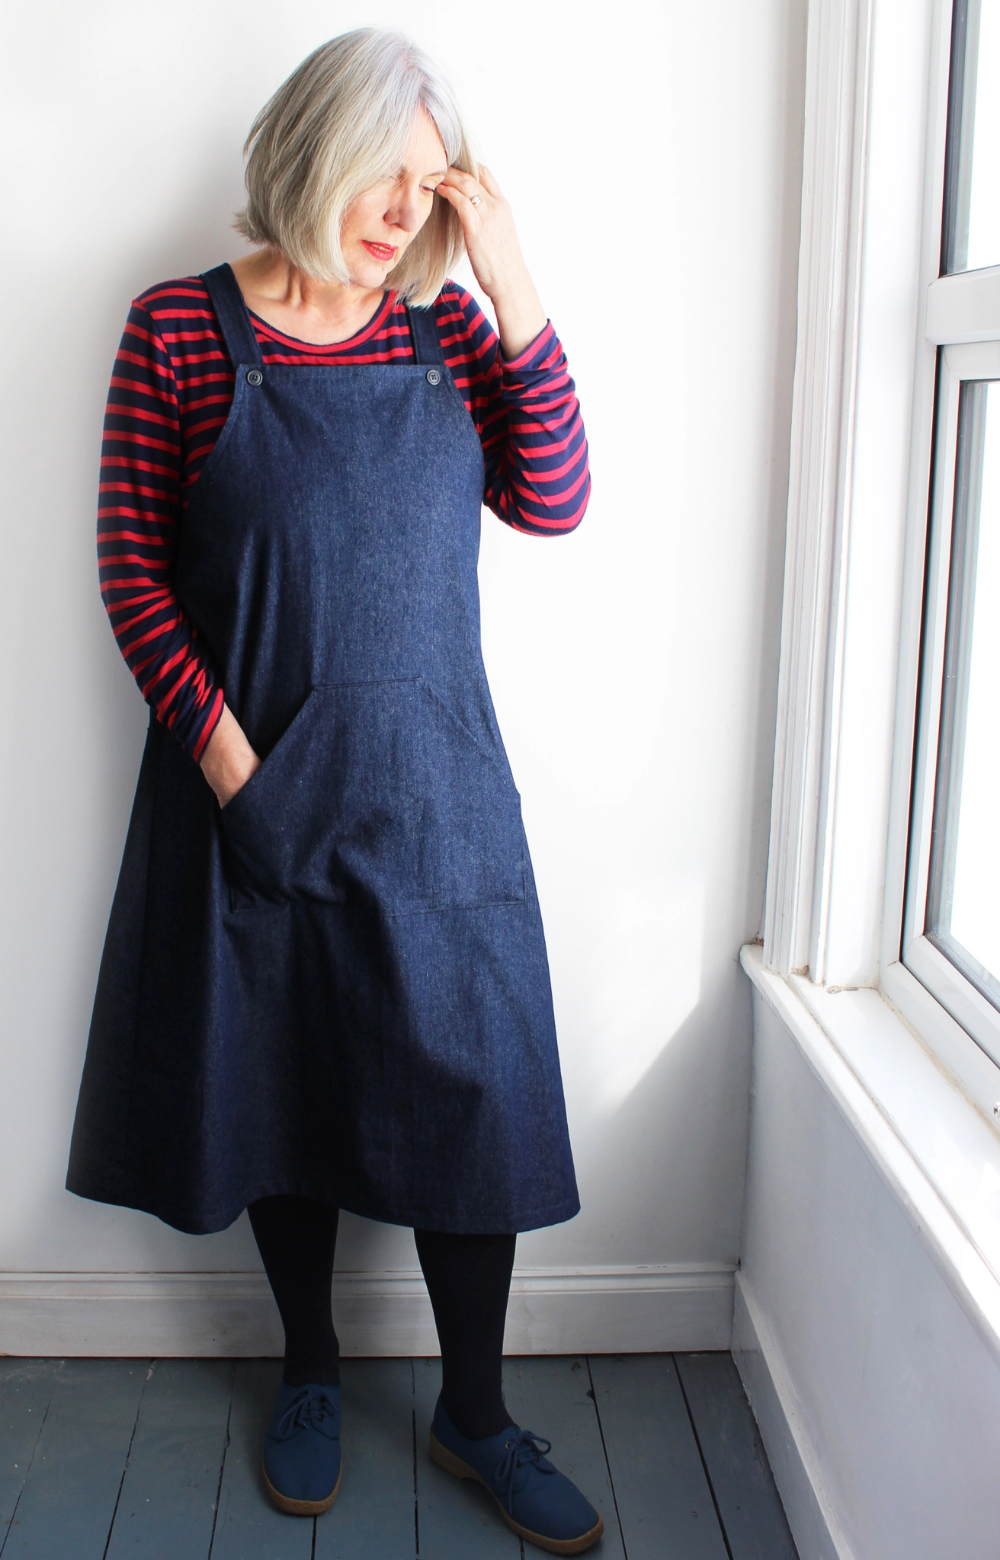 Pinafore Dress Outfit Ideas